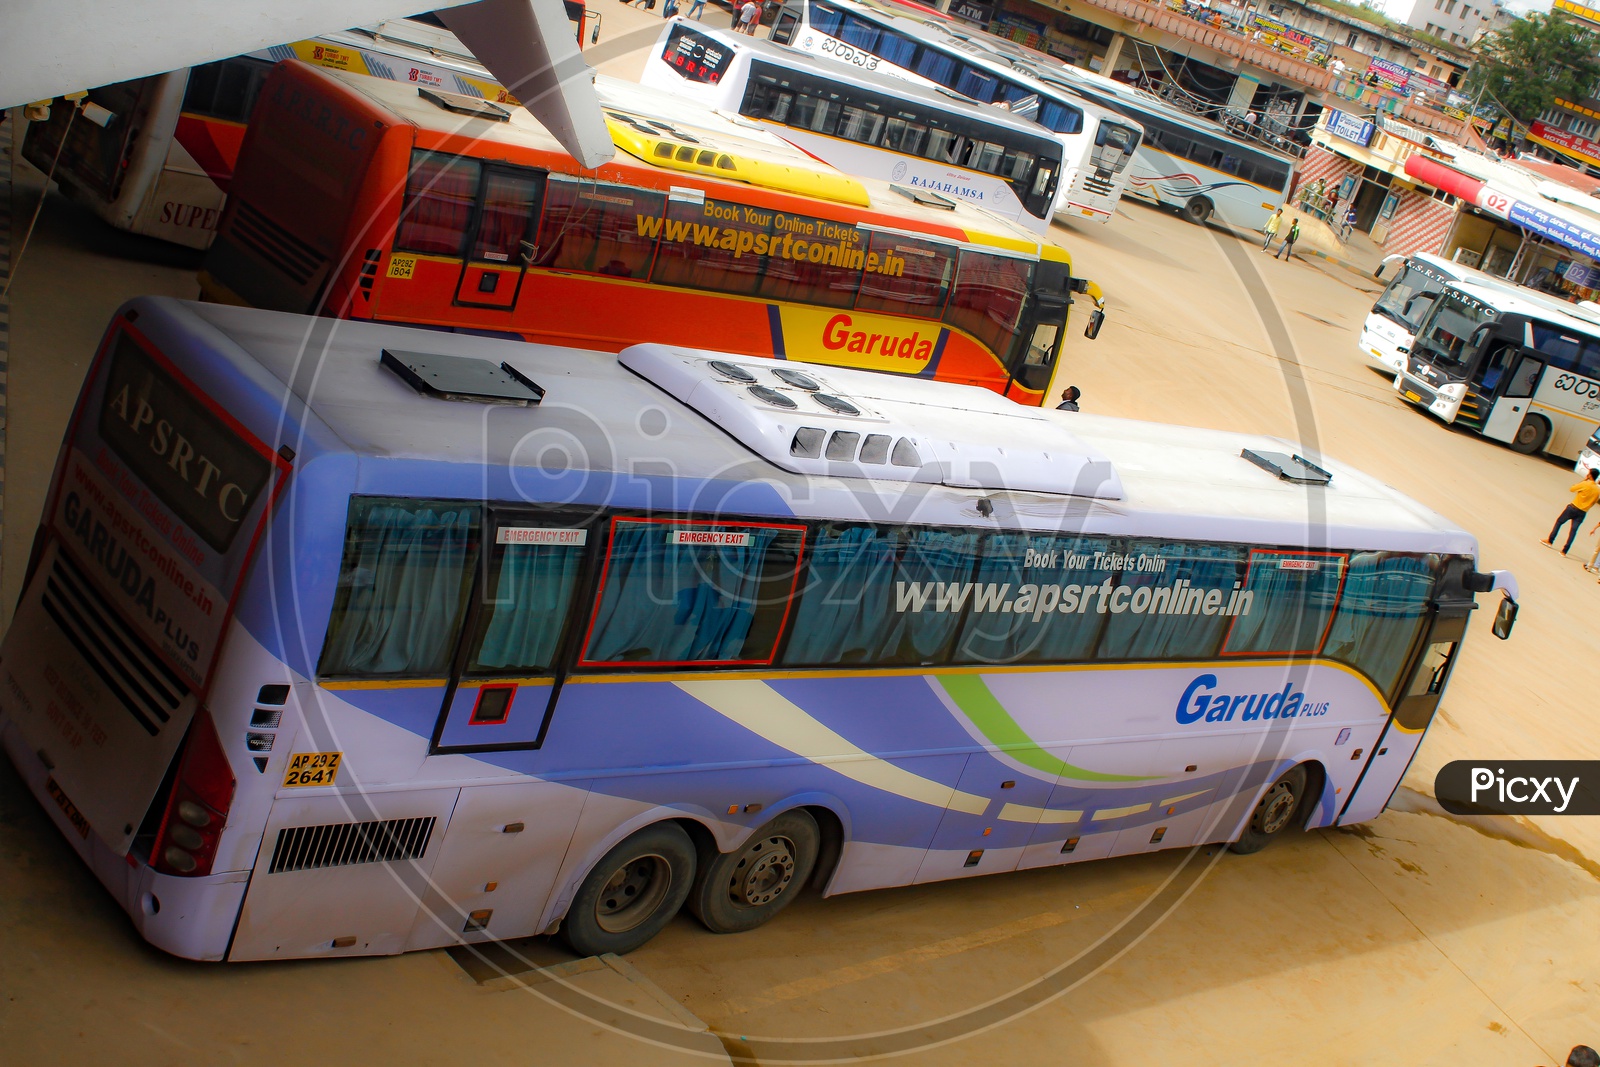 Majestic Bus Station or Kempegowda Bus Station